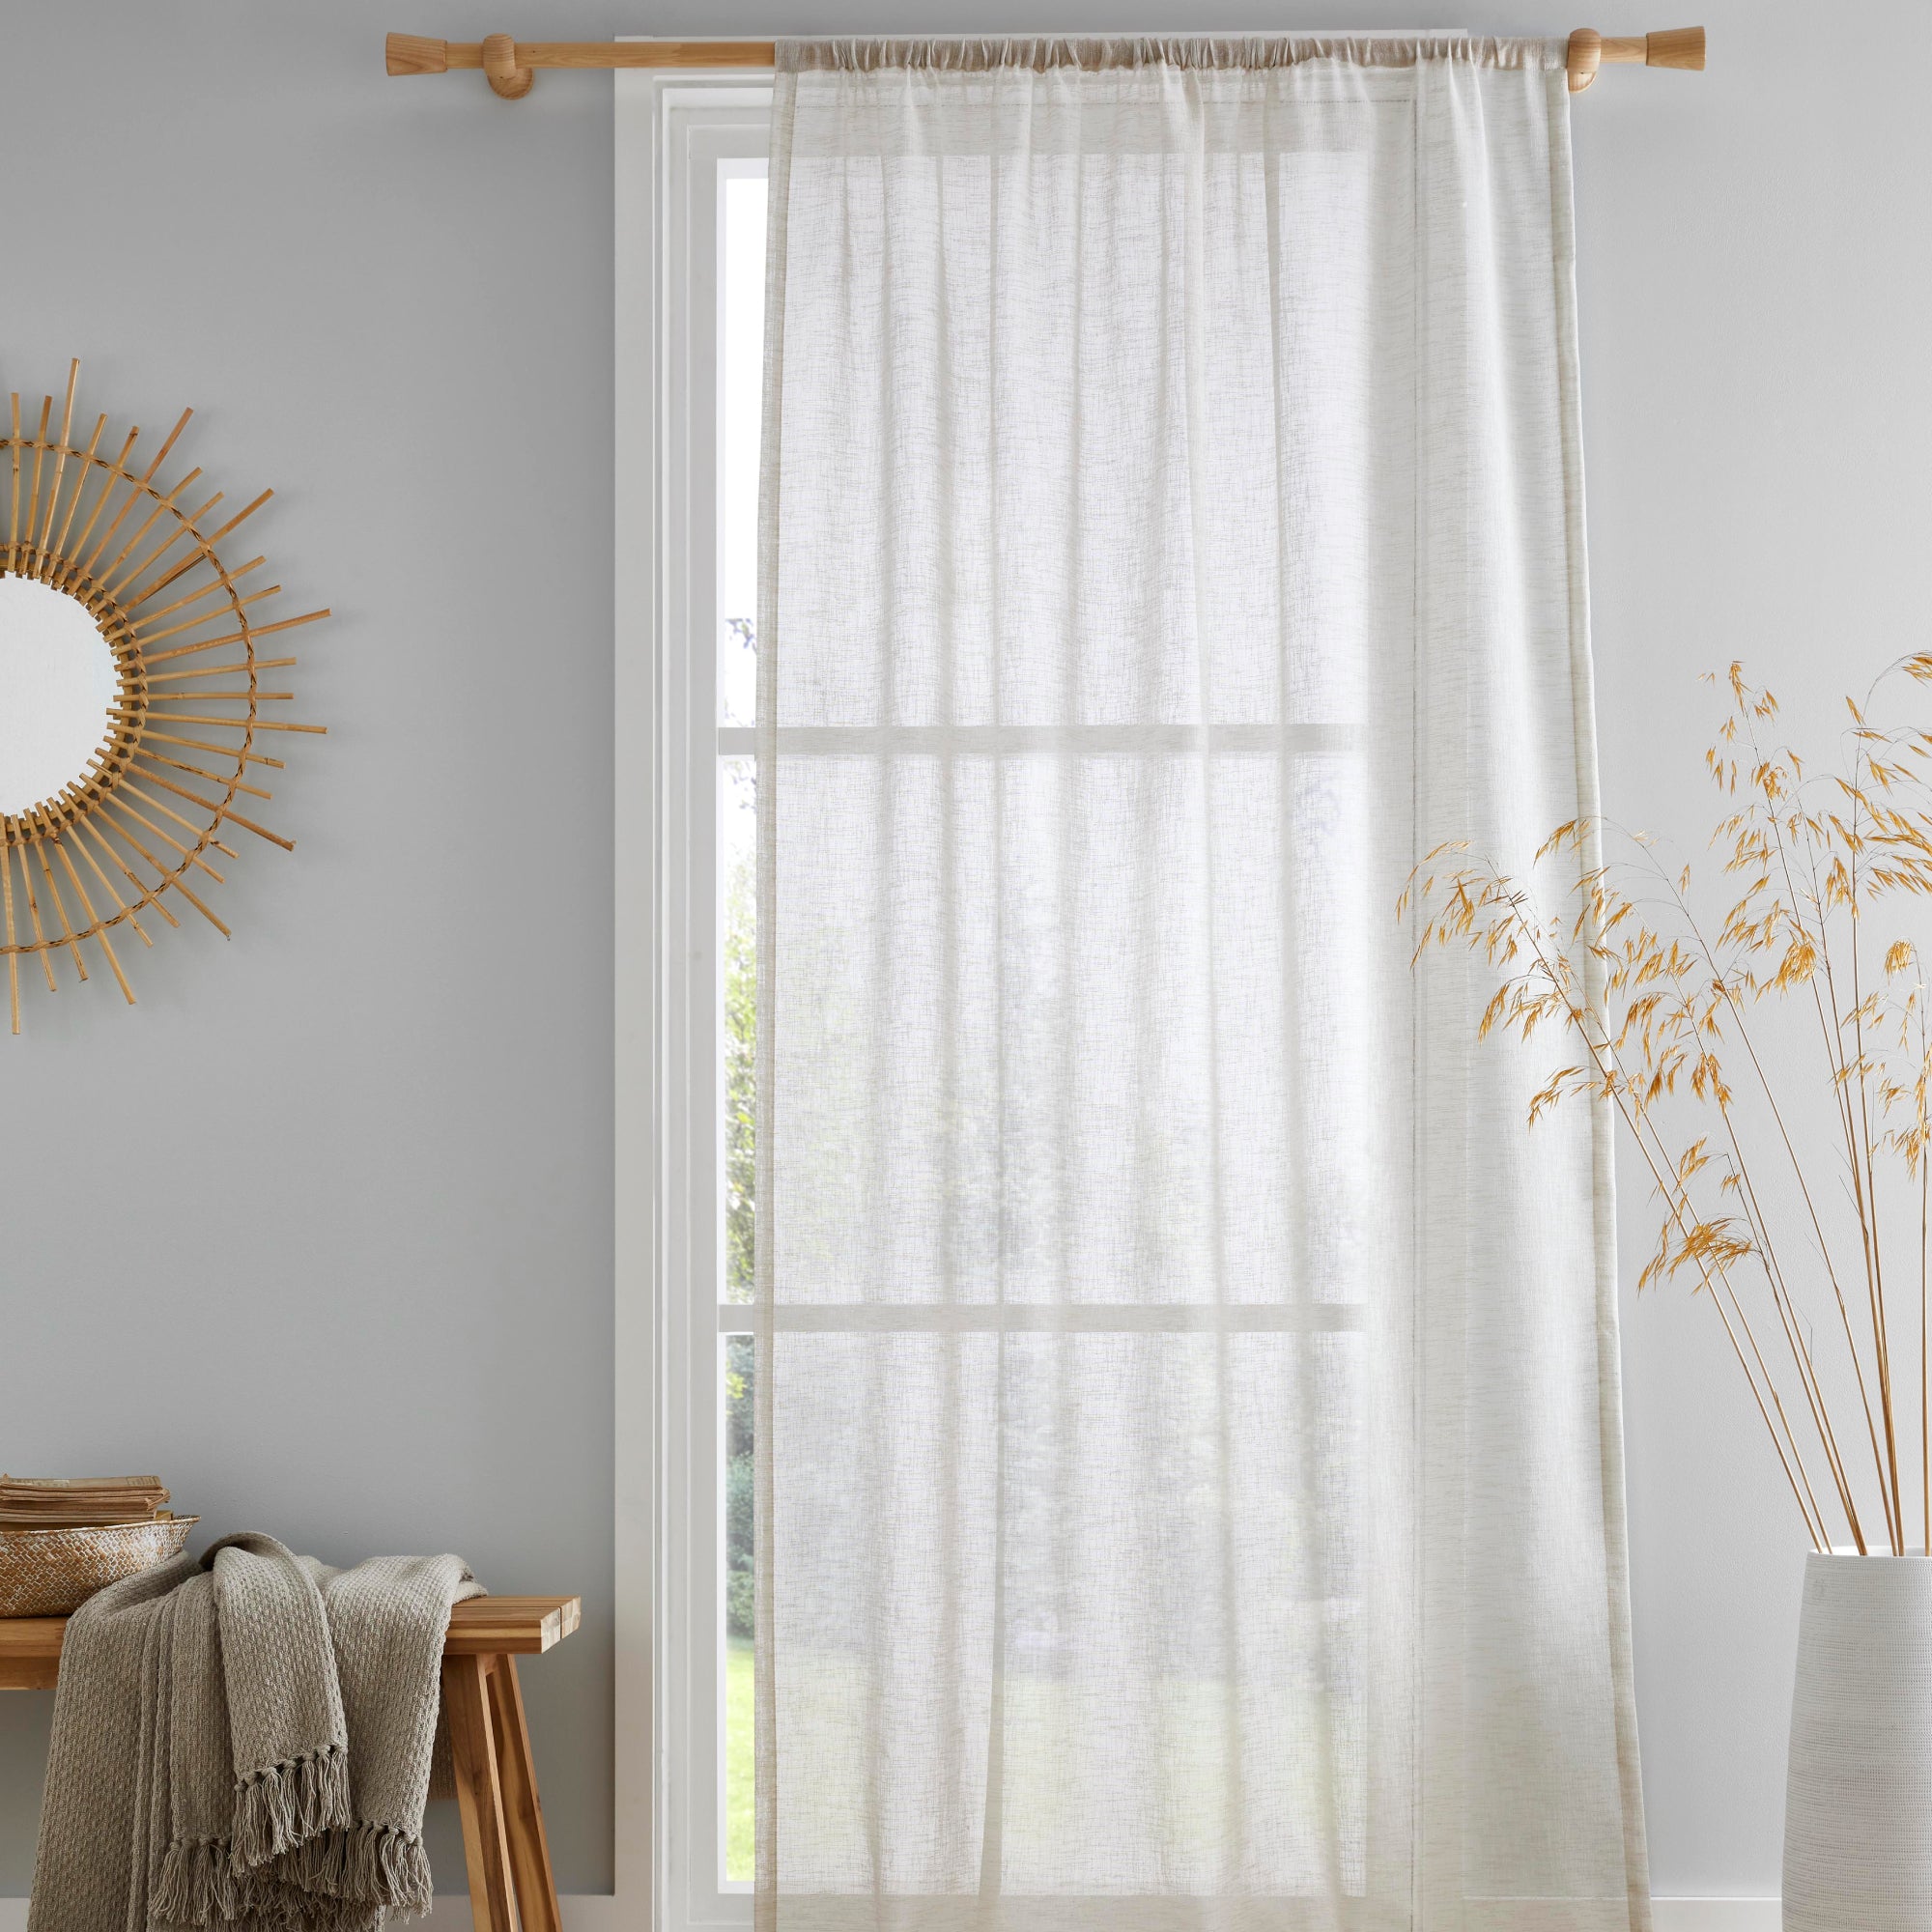 Voile Panel Kayla by Drift Home in Natural